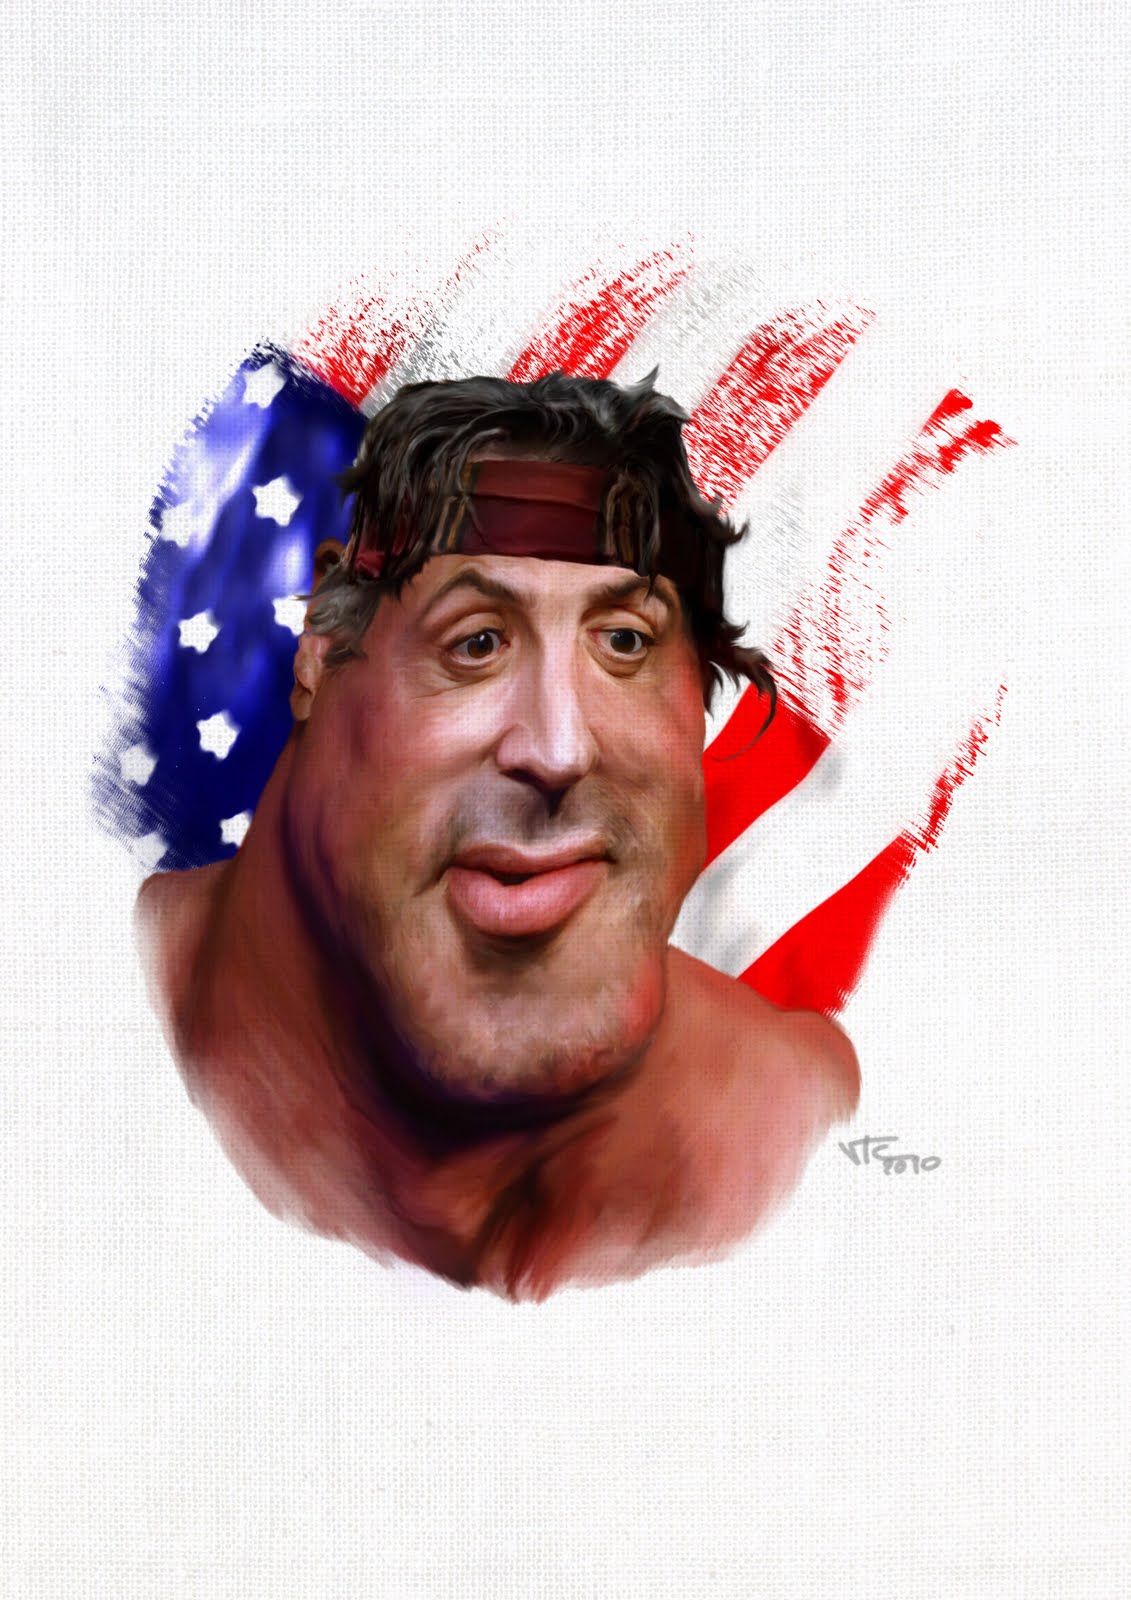 Dessins ou caricatures - Page 15 SYLVESTER+STALLONE